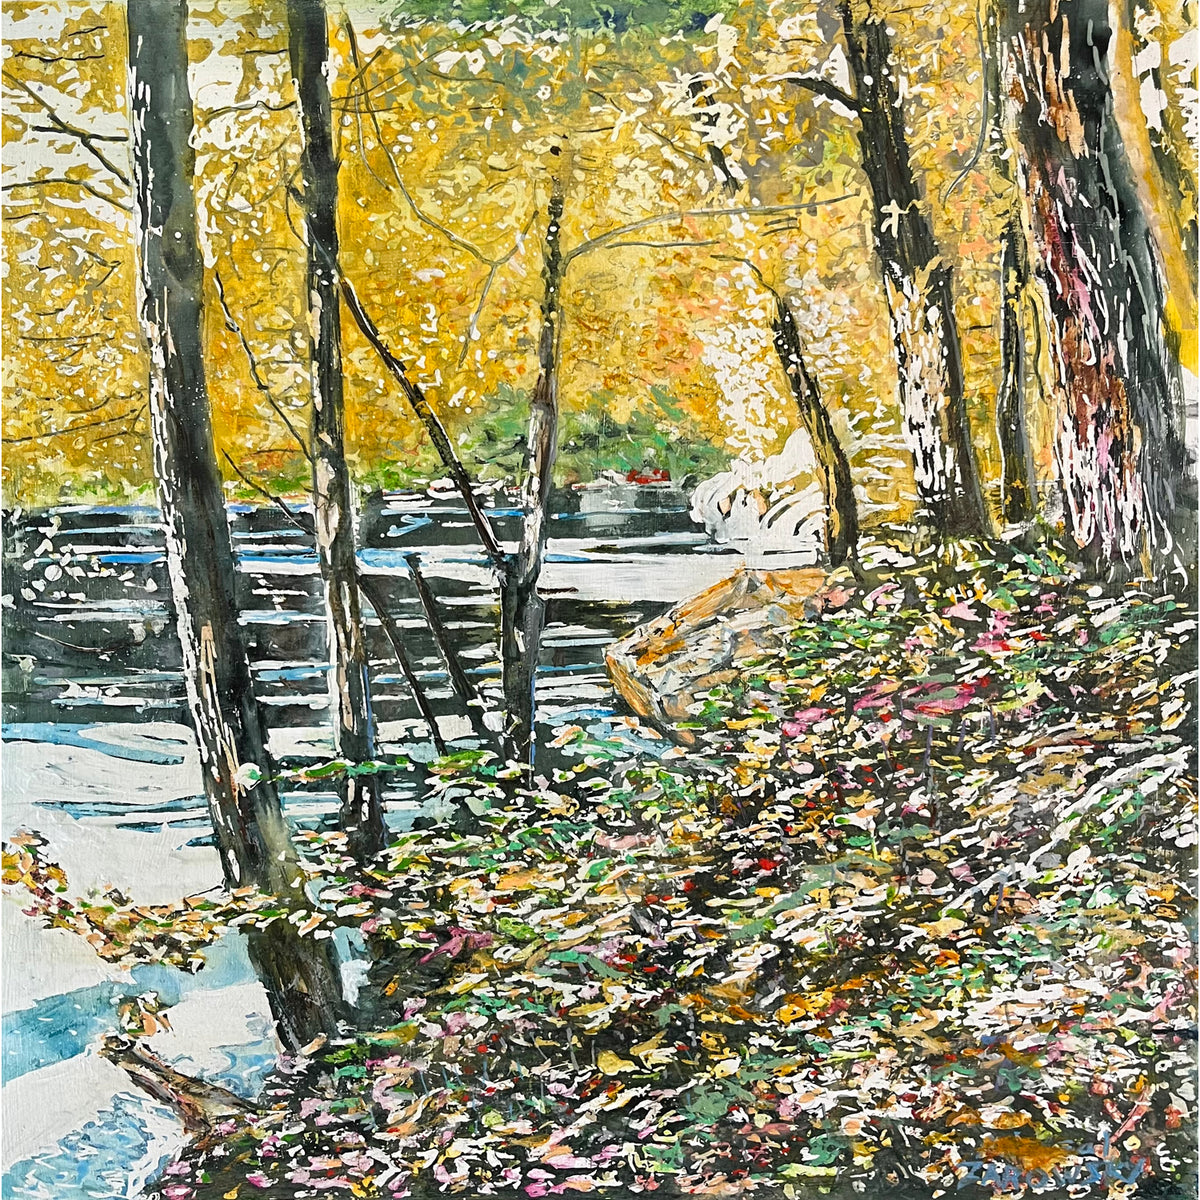 Micheal Zarowsky - October Yellow, 20" x 20"